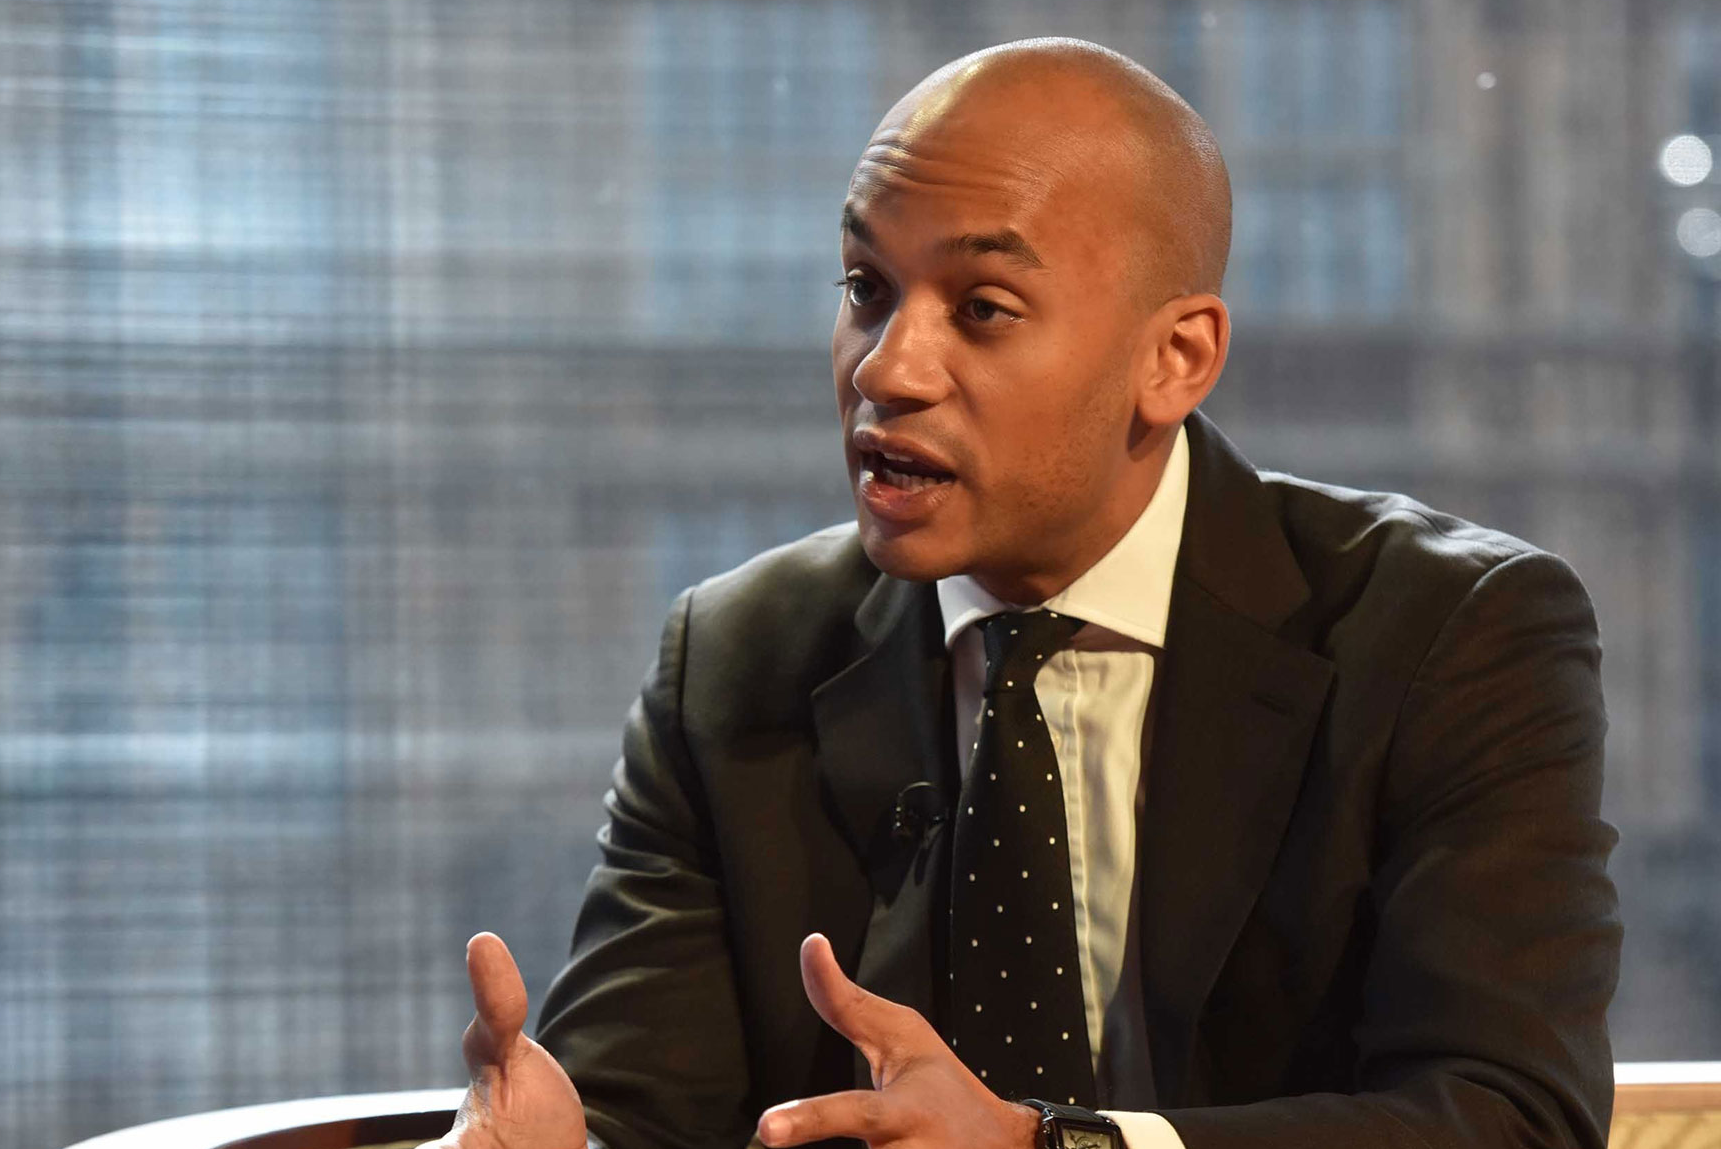 Chuka Umunna appearing on BBC One's The Andrew Marr Show on 10 May, 2015